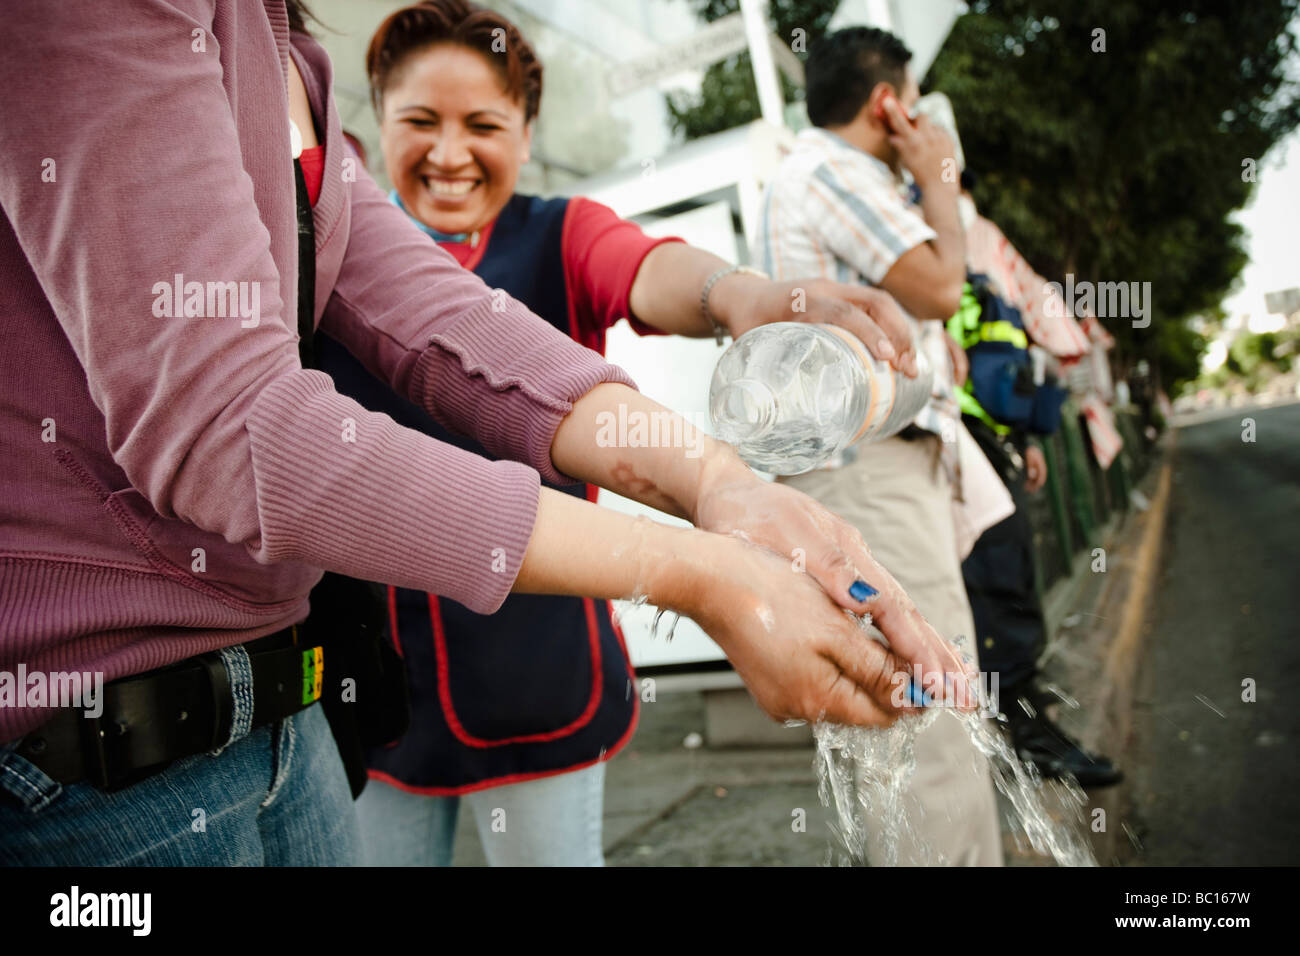 A woman cleans other's hands with a bottle of water during the swine flu epidemic in Mexico City, DF, Mexico. Stock Photo